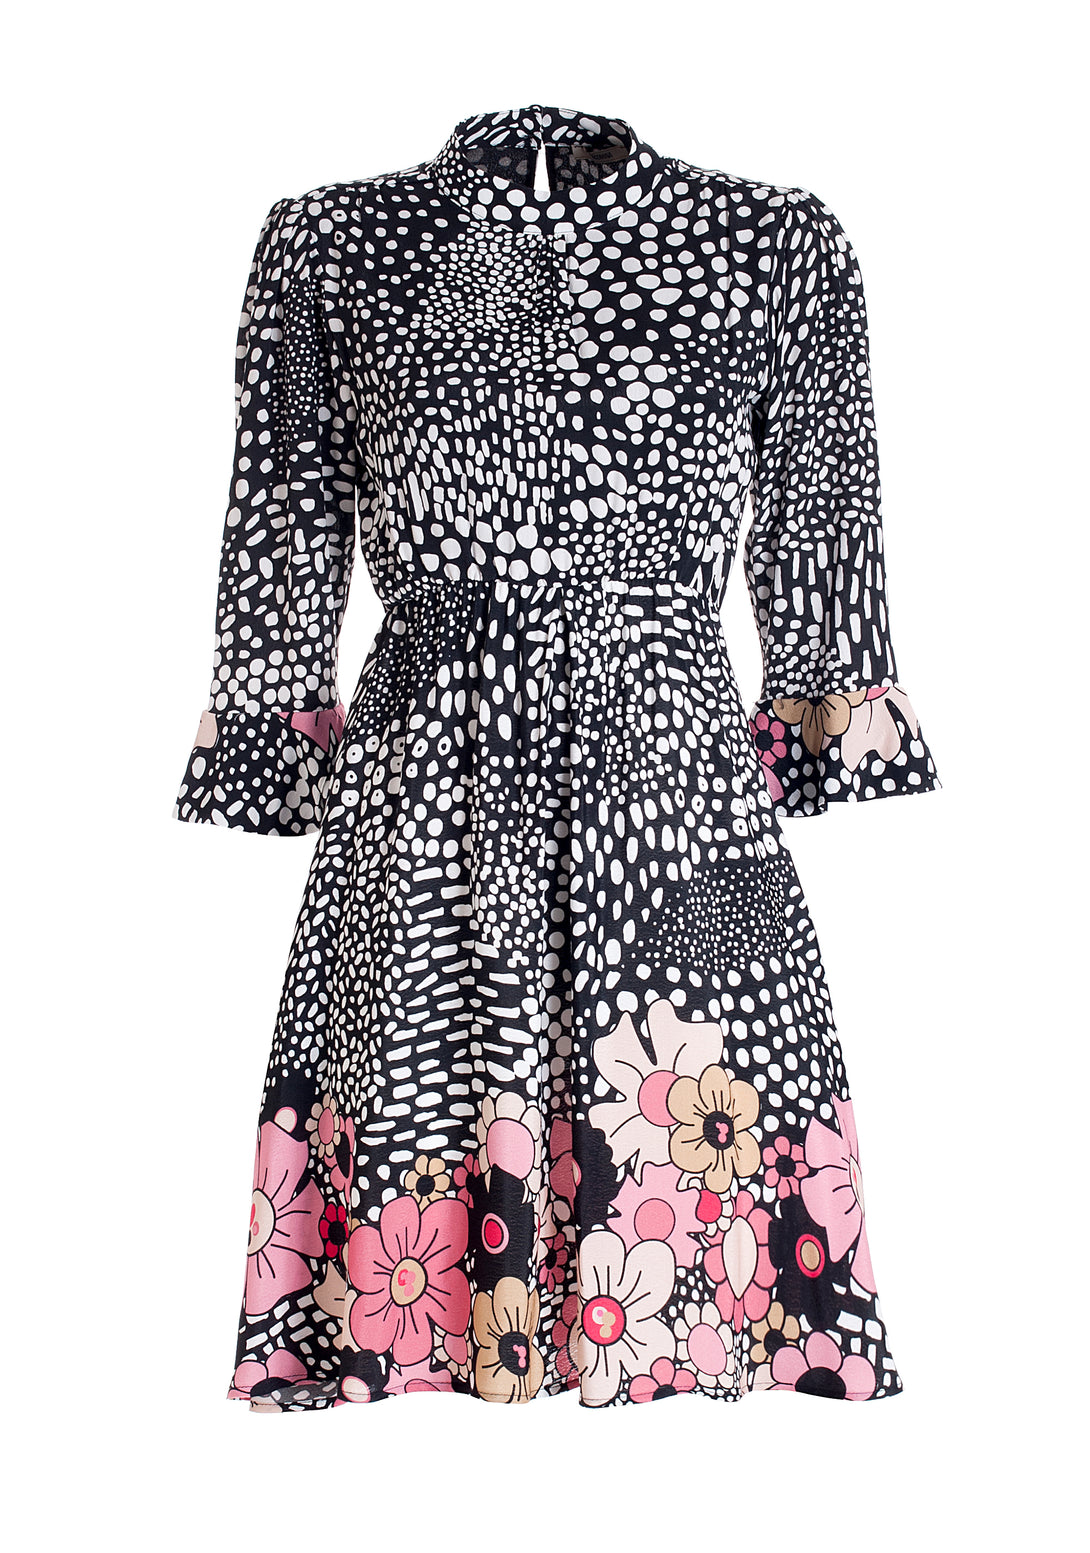 Mini dress regular fit made in viscose with animalier print with flowers